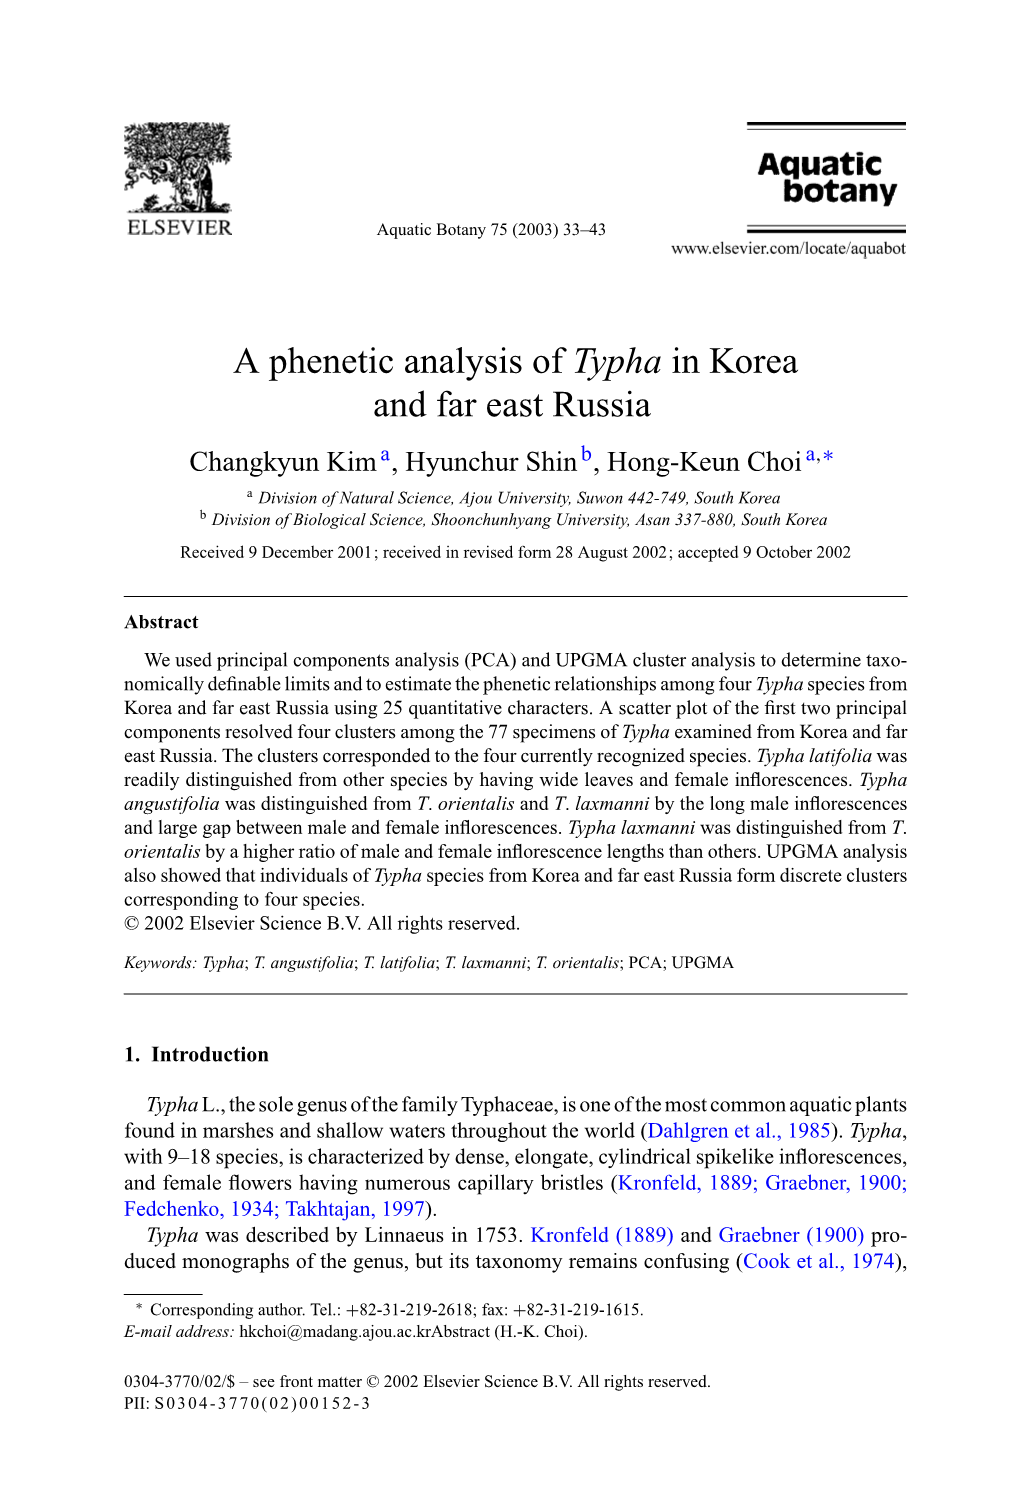 A Phenetic Analysis of Typha in Korea and Far East Russia